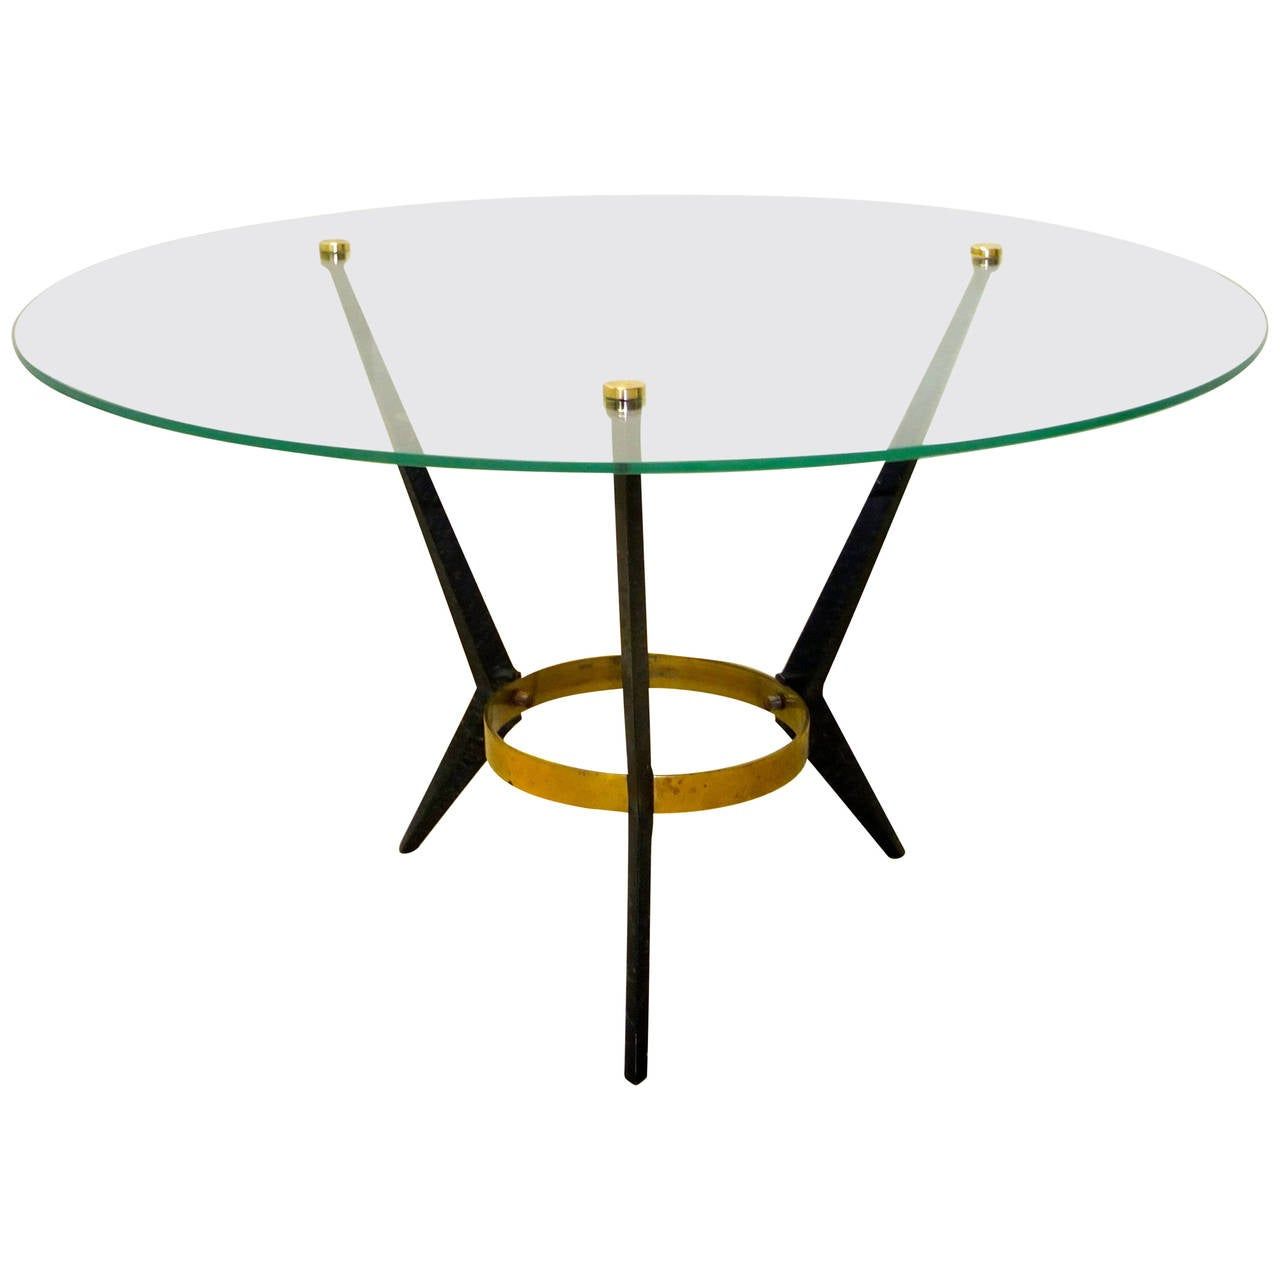 Angelo Ostuni Round Top Tripod Cocktail Table At 1stdibs Pertaining To Most Recent Coffee Tables With Tripod Legs (View 5 of 10)